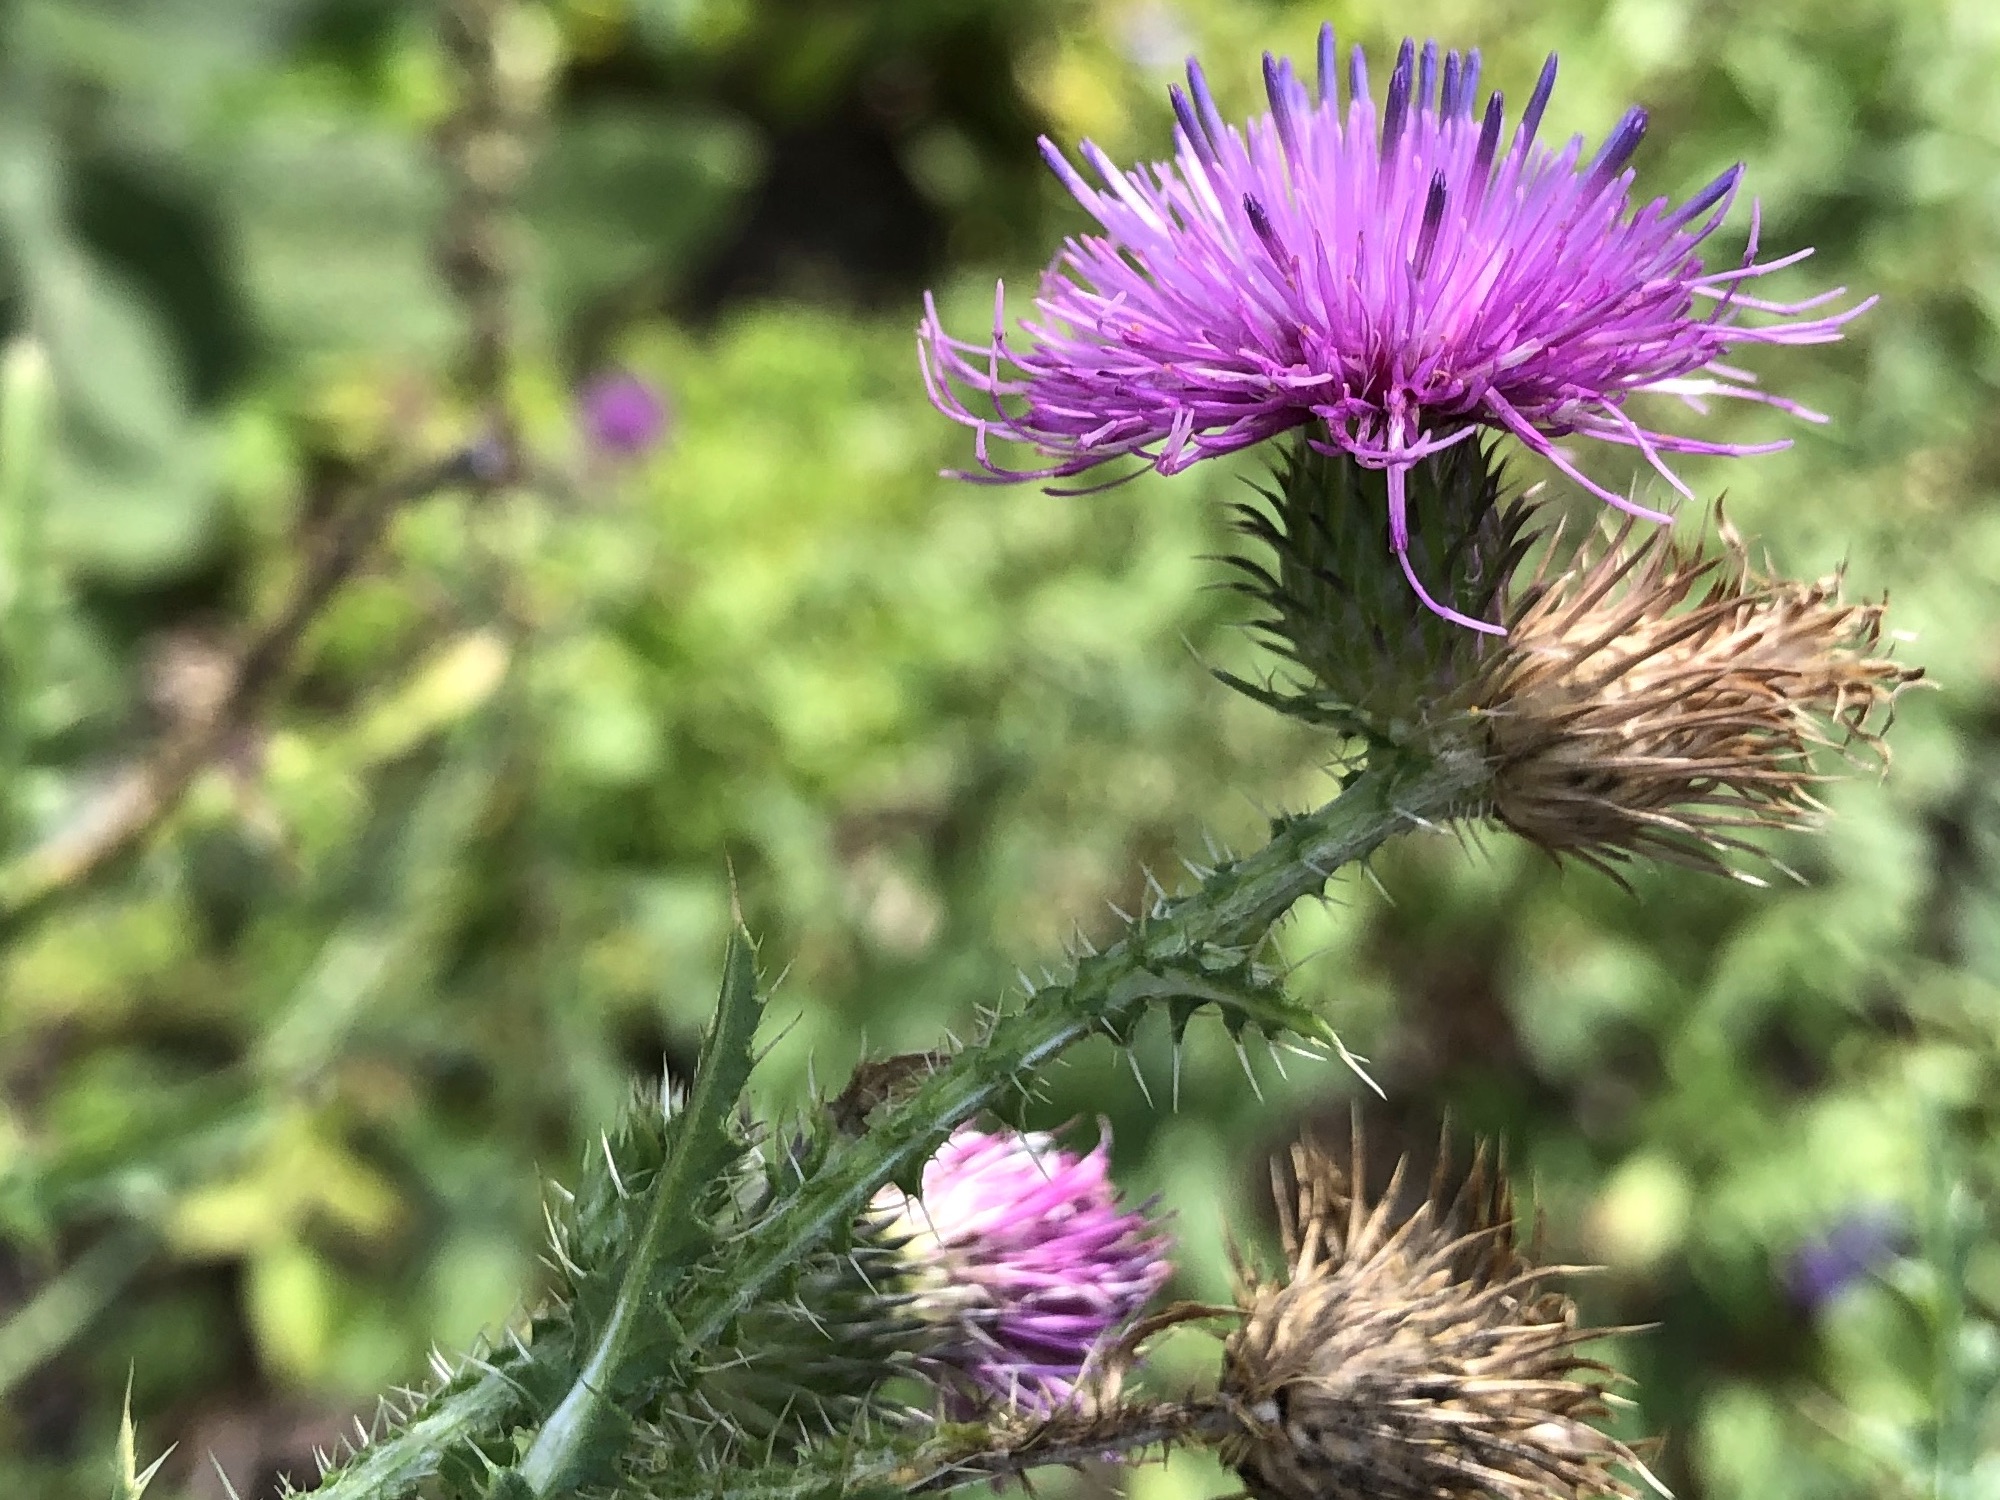 Plumeless Thistle between sidewalk and curb on Tumalo Trail in Madison, Wisconsin on August 16, 2022.